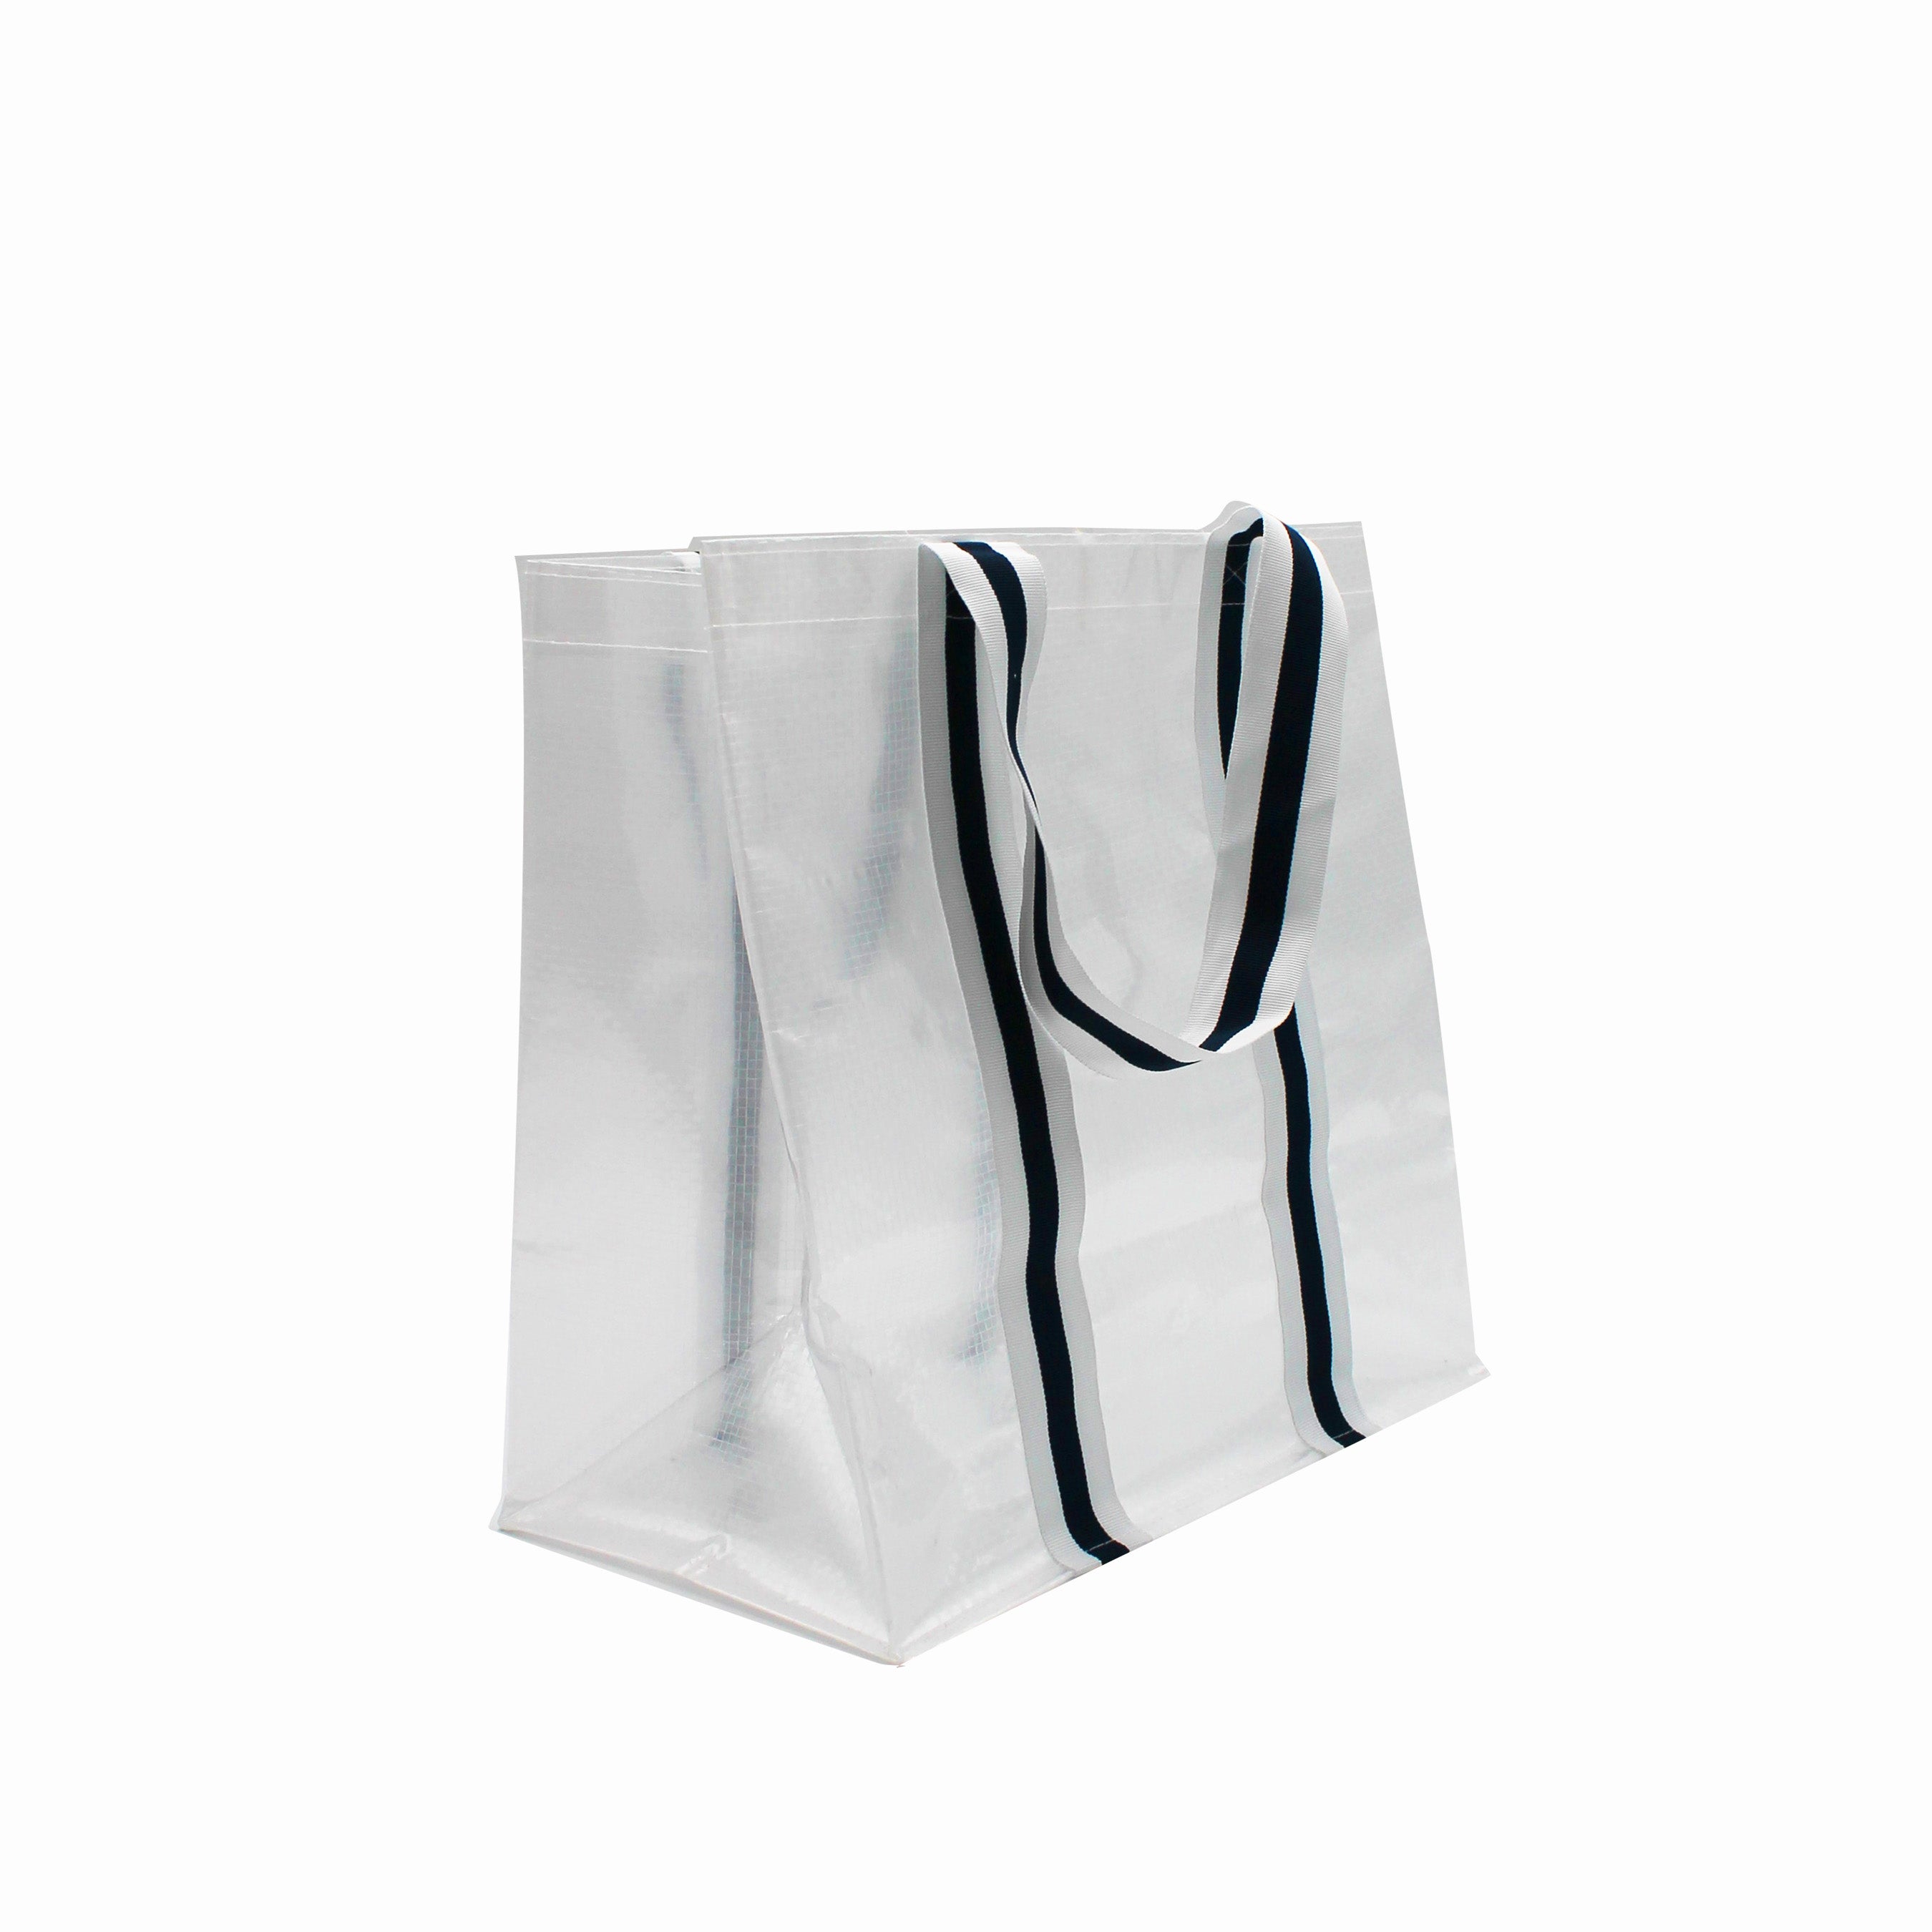 Shopping Bags - Reusable Tote Bags - Grocery Bags - IKEA